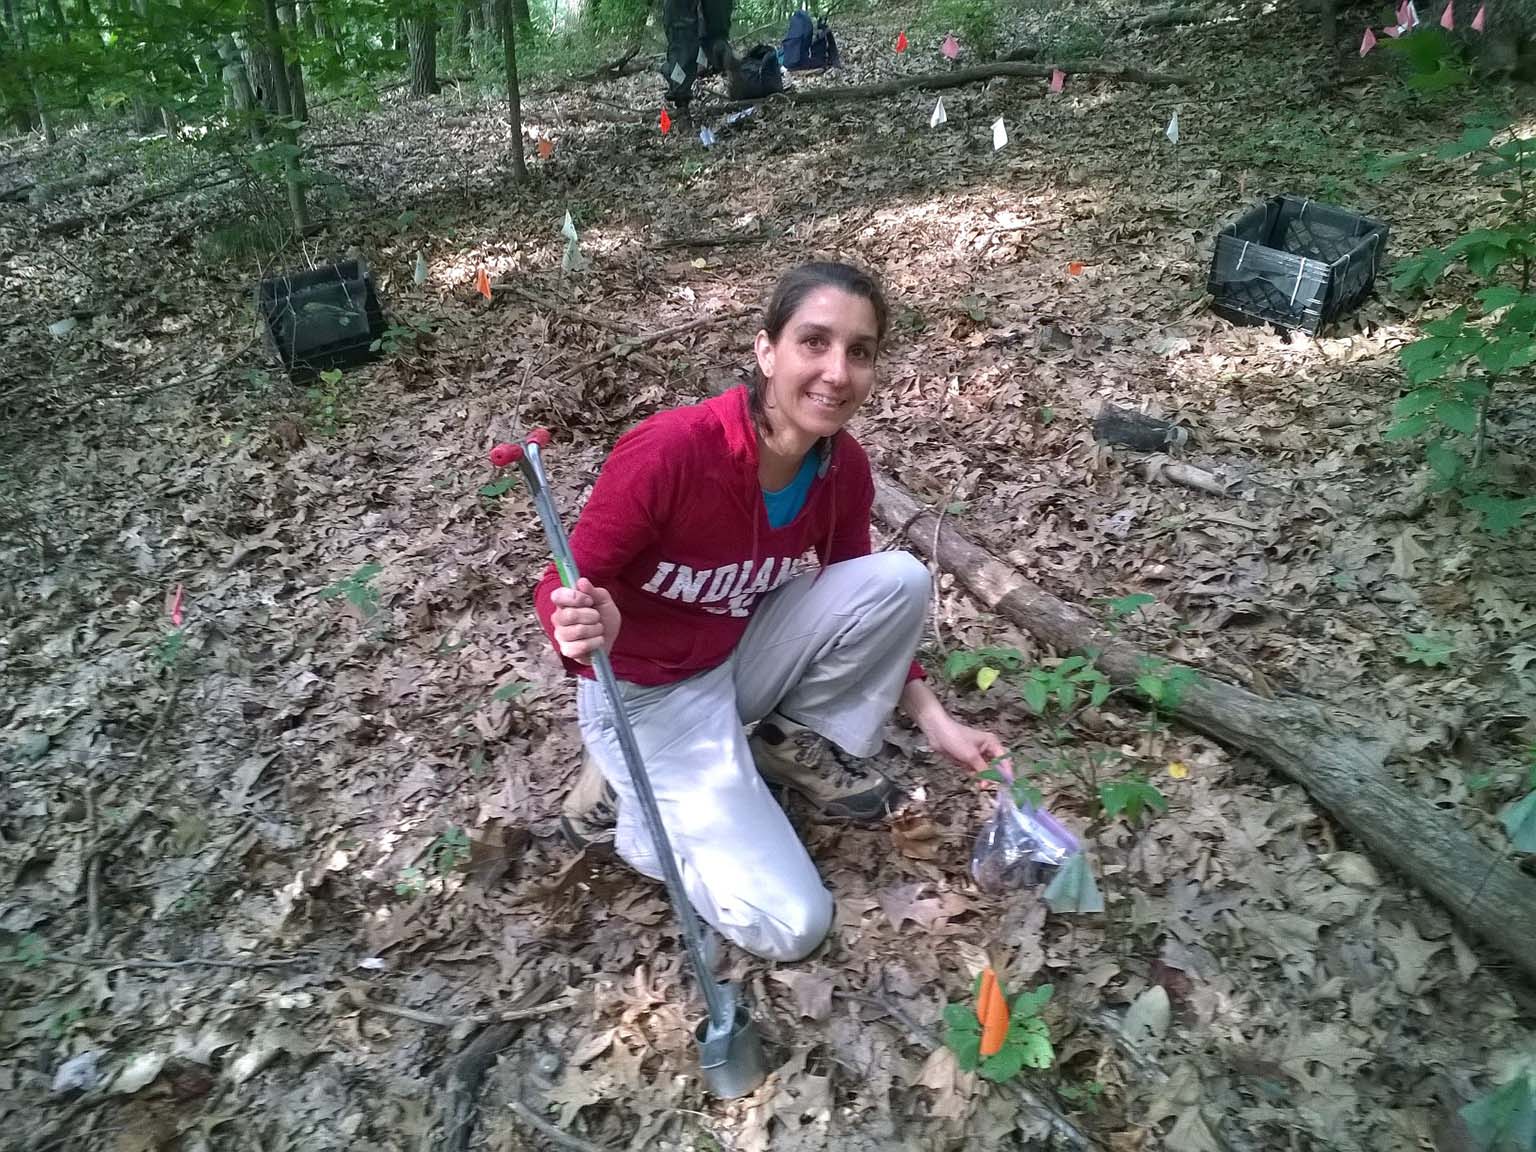 Farrah Bashey-Visser collecting soil samples from a wooded area.